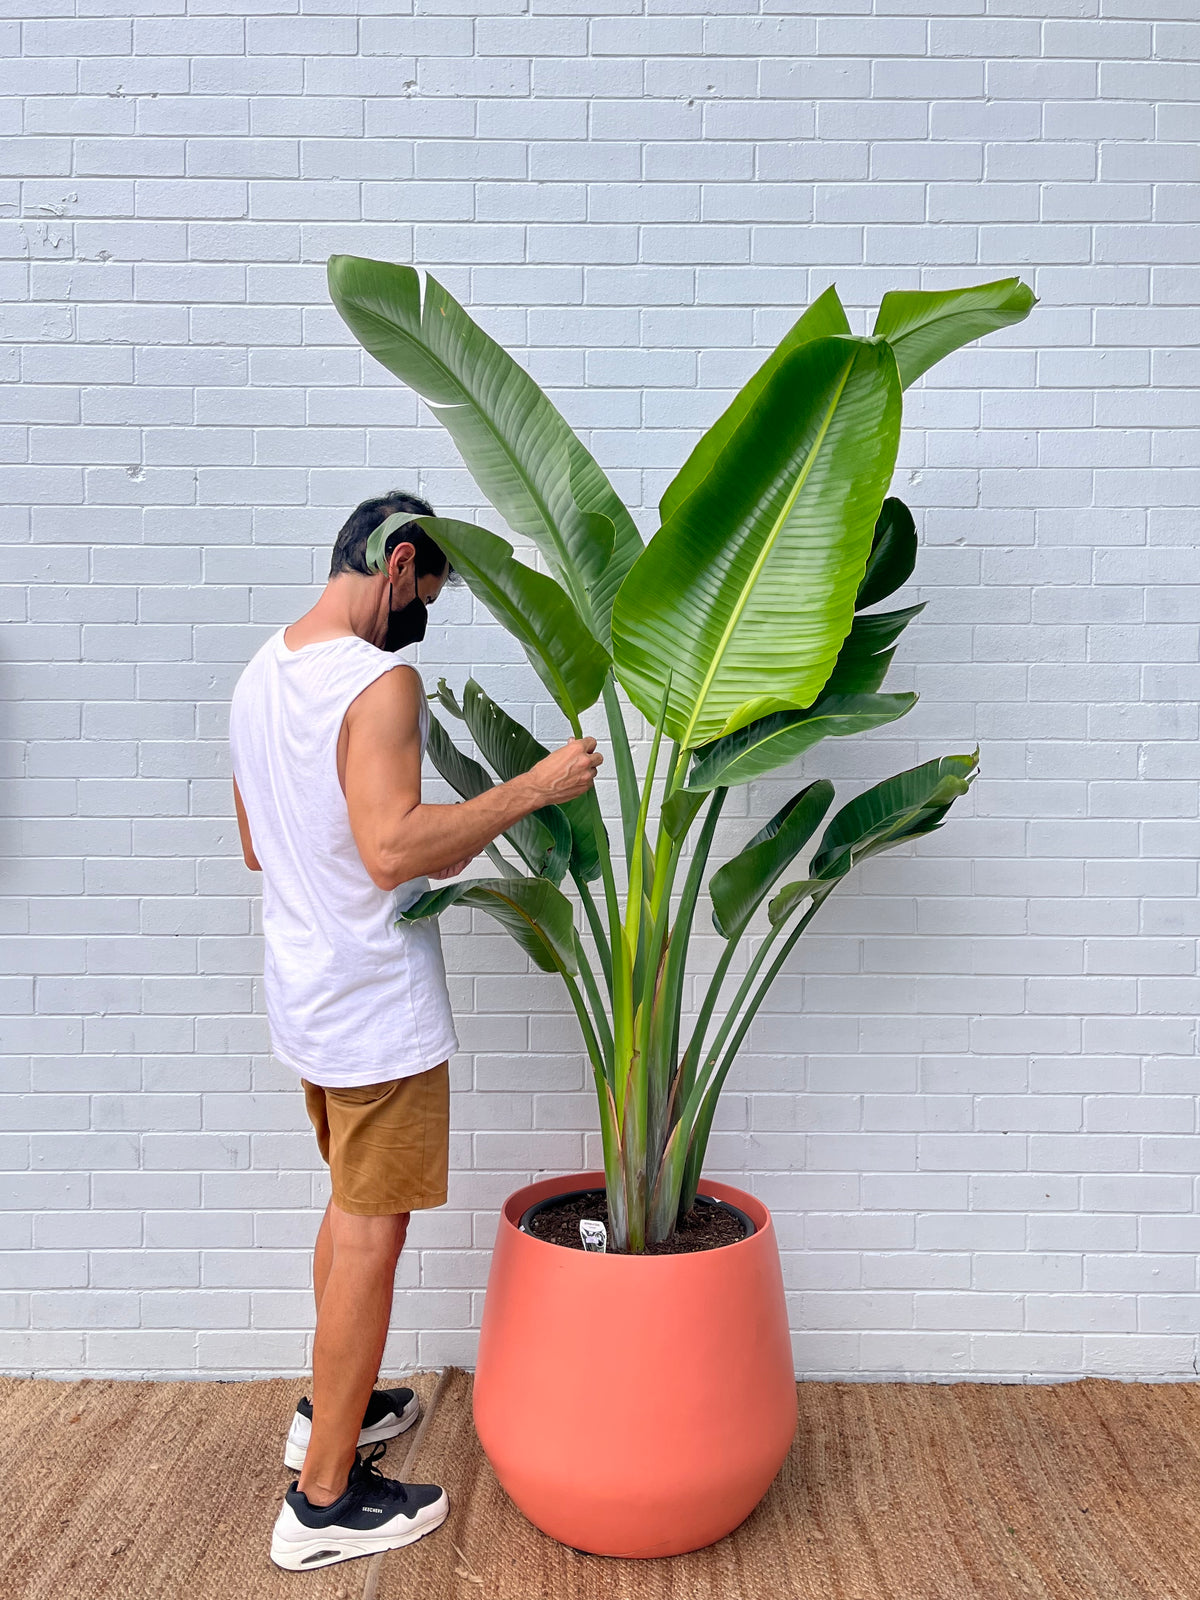 XL Bird of paradise 2.3M tall (Pickup/Delivery)